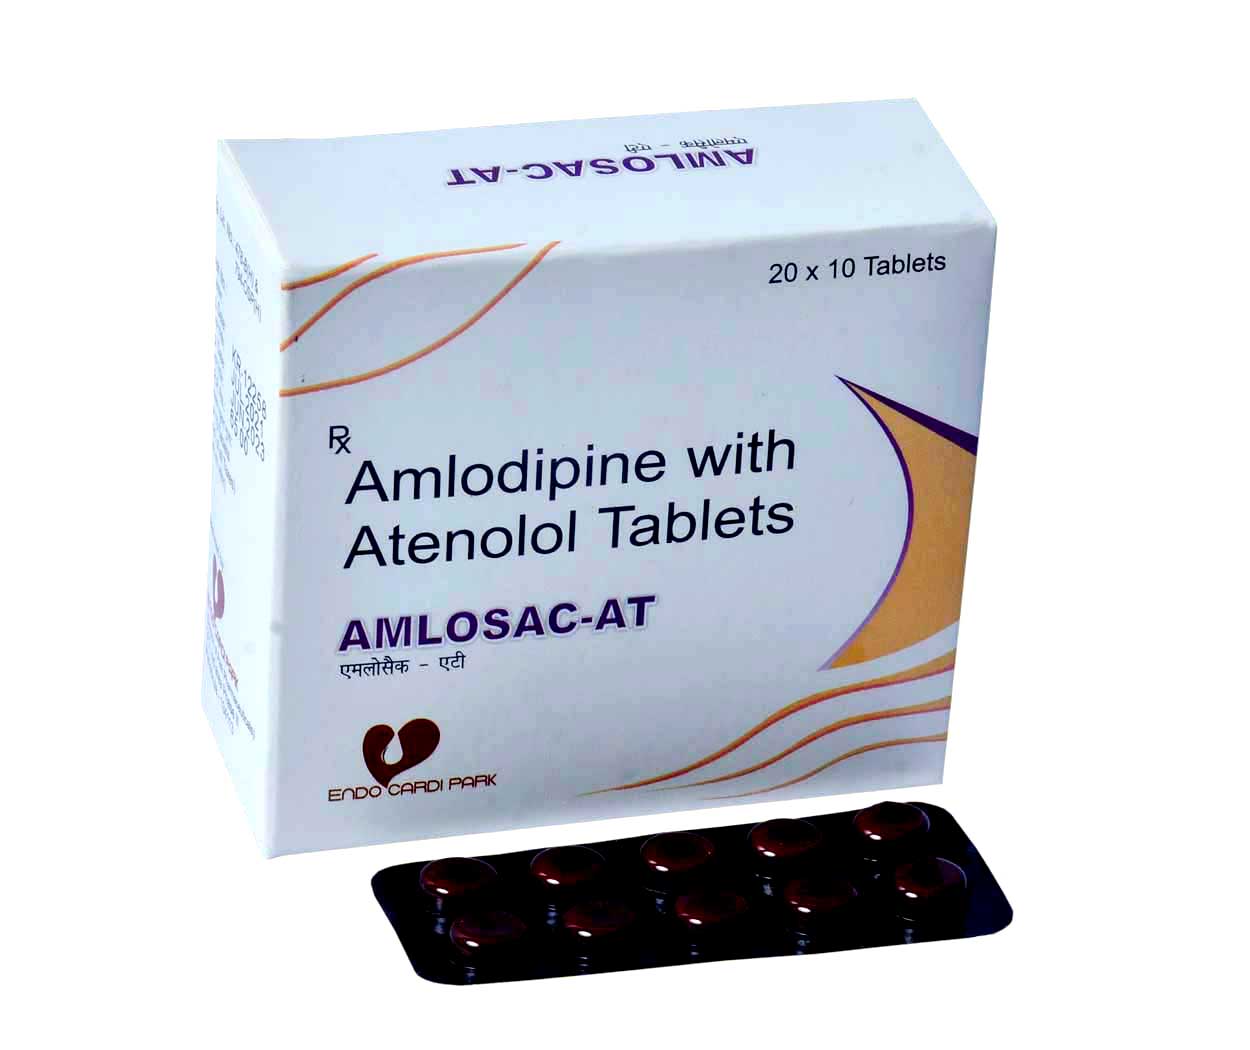 Product Name: AMLOSAC AT, Compositions of AMLOSAC AT are Amlodipine with Atenolol Tablets - Park Pharmaceuticals